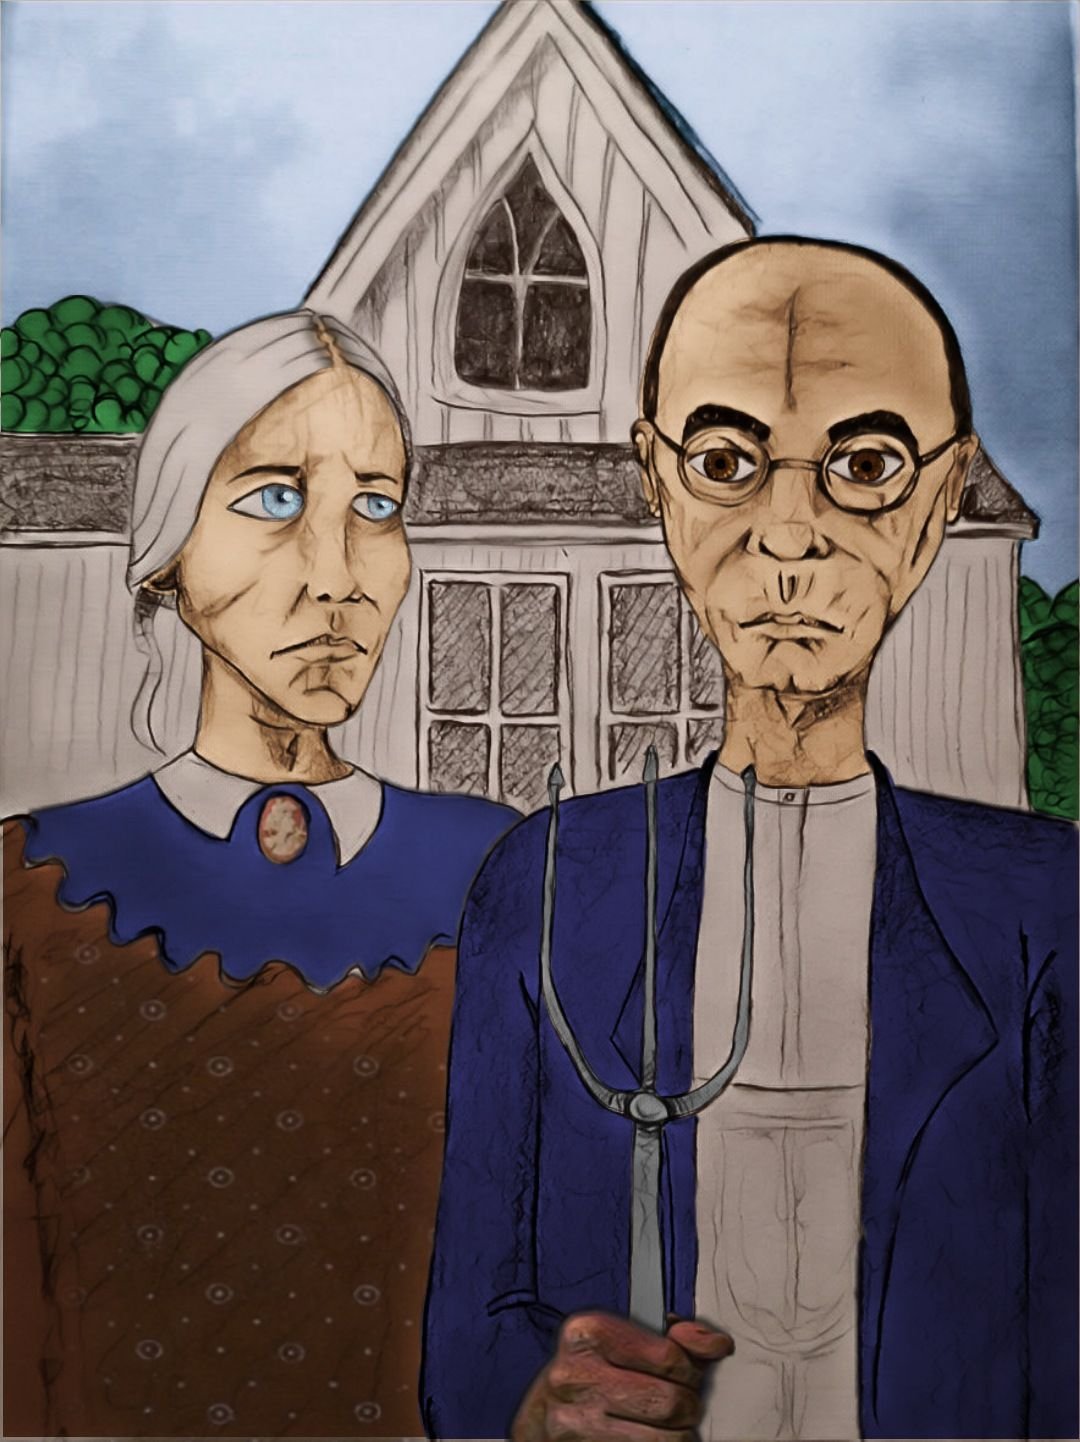 American Gothic Meaning Grant Wood Painting Interpretation